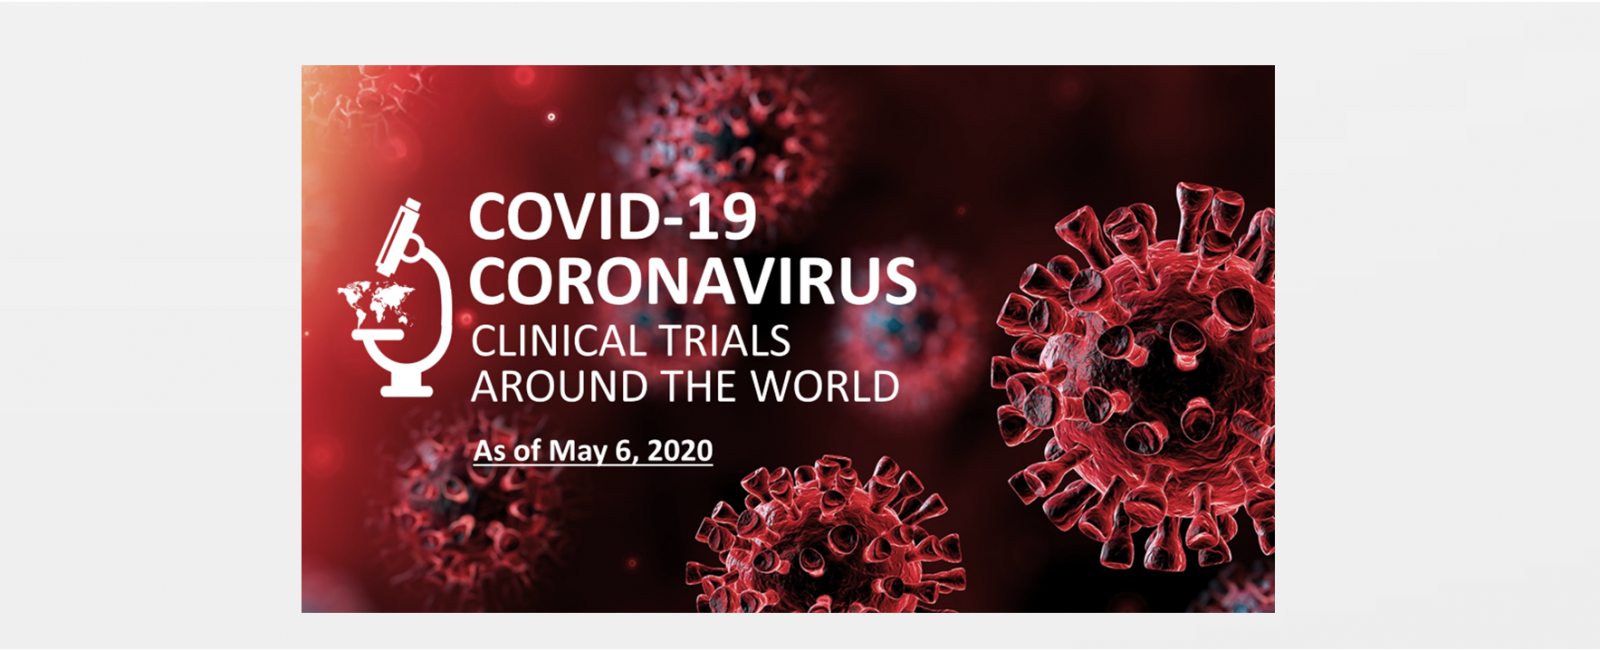 Covid-19 coronavirus clinical trials numbers for April